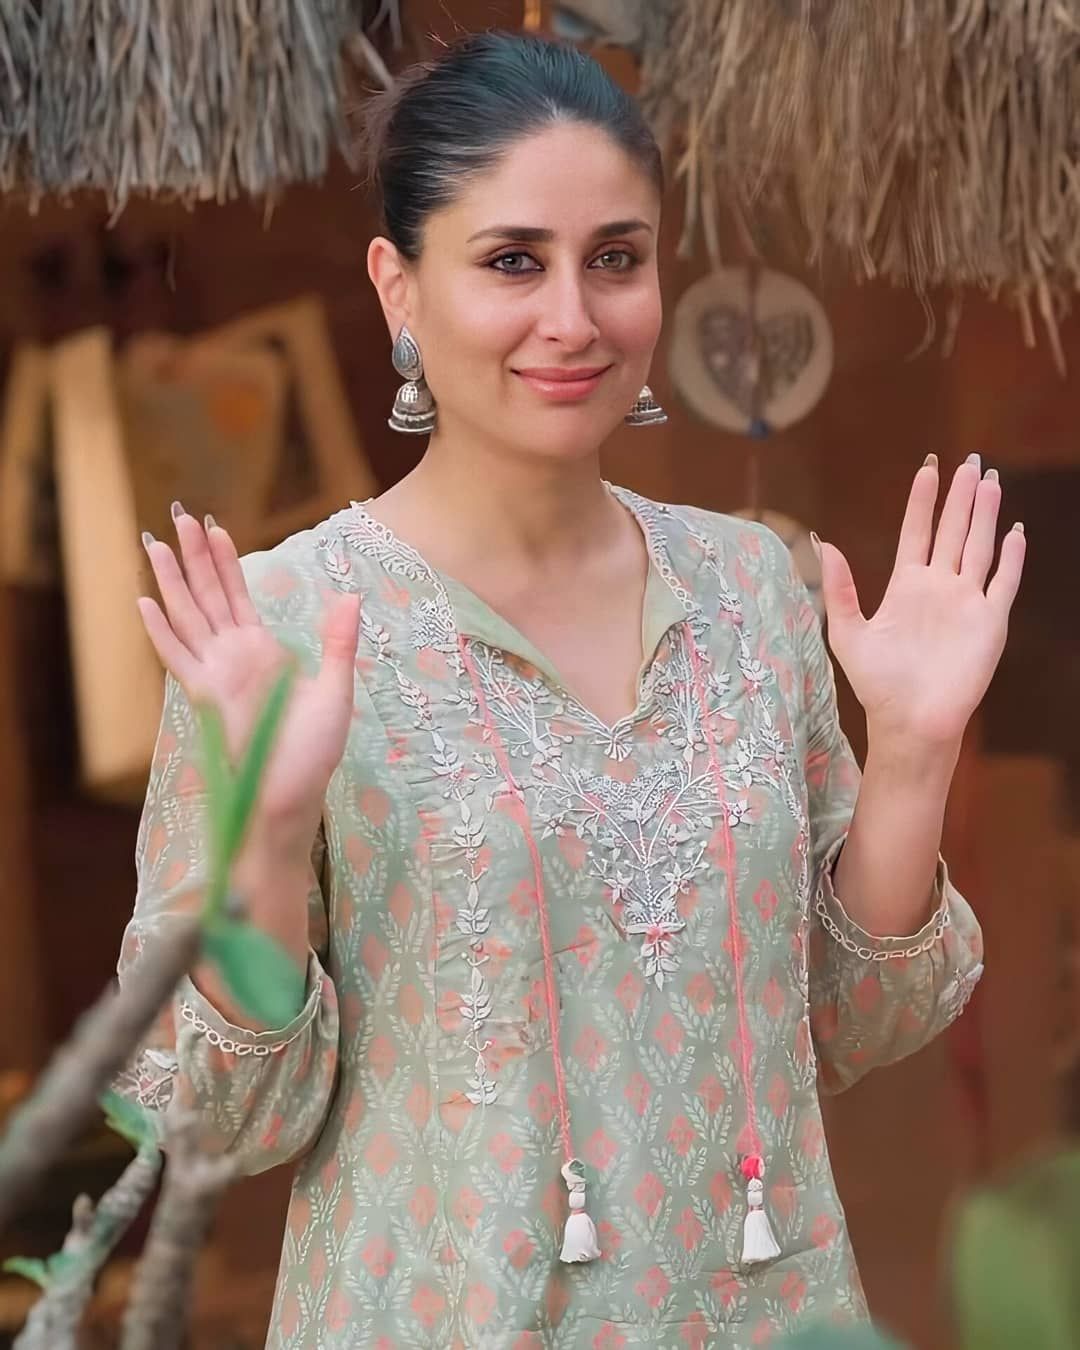 Kareena Kapoor Ready To Leave Fans 'Slightly Shocked' With Laal Singh Chaddha Character, Calls Aamir Khan A Living Legend